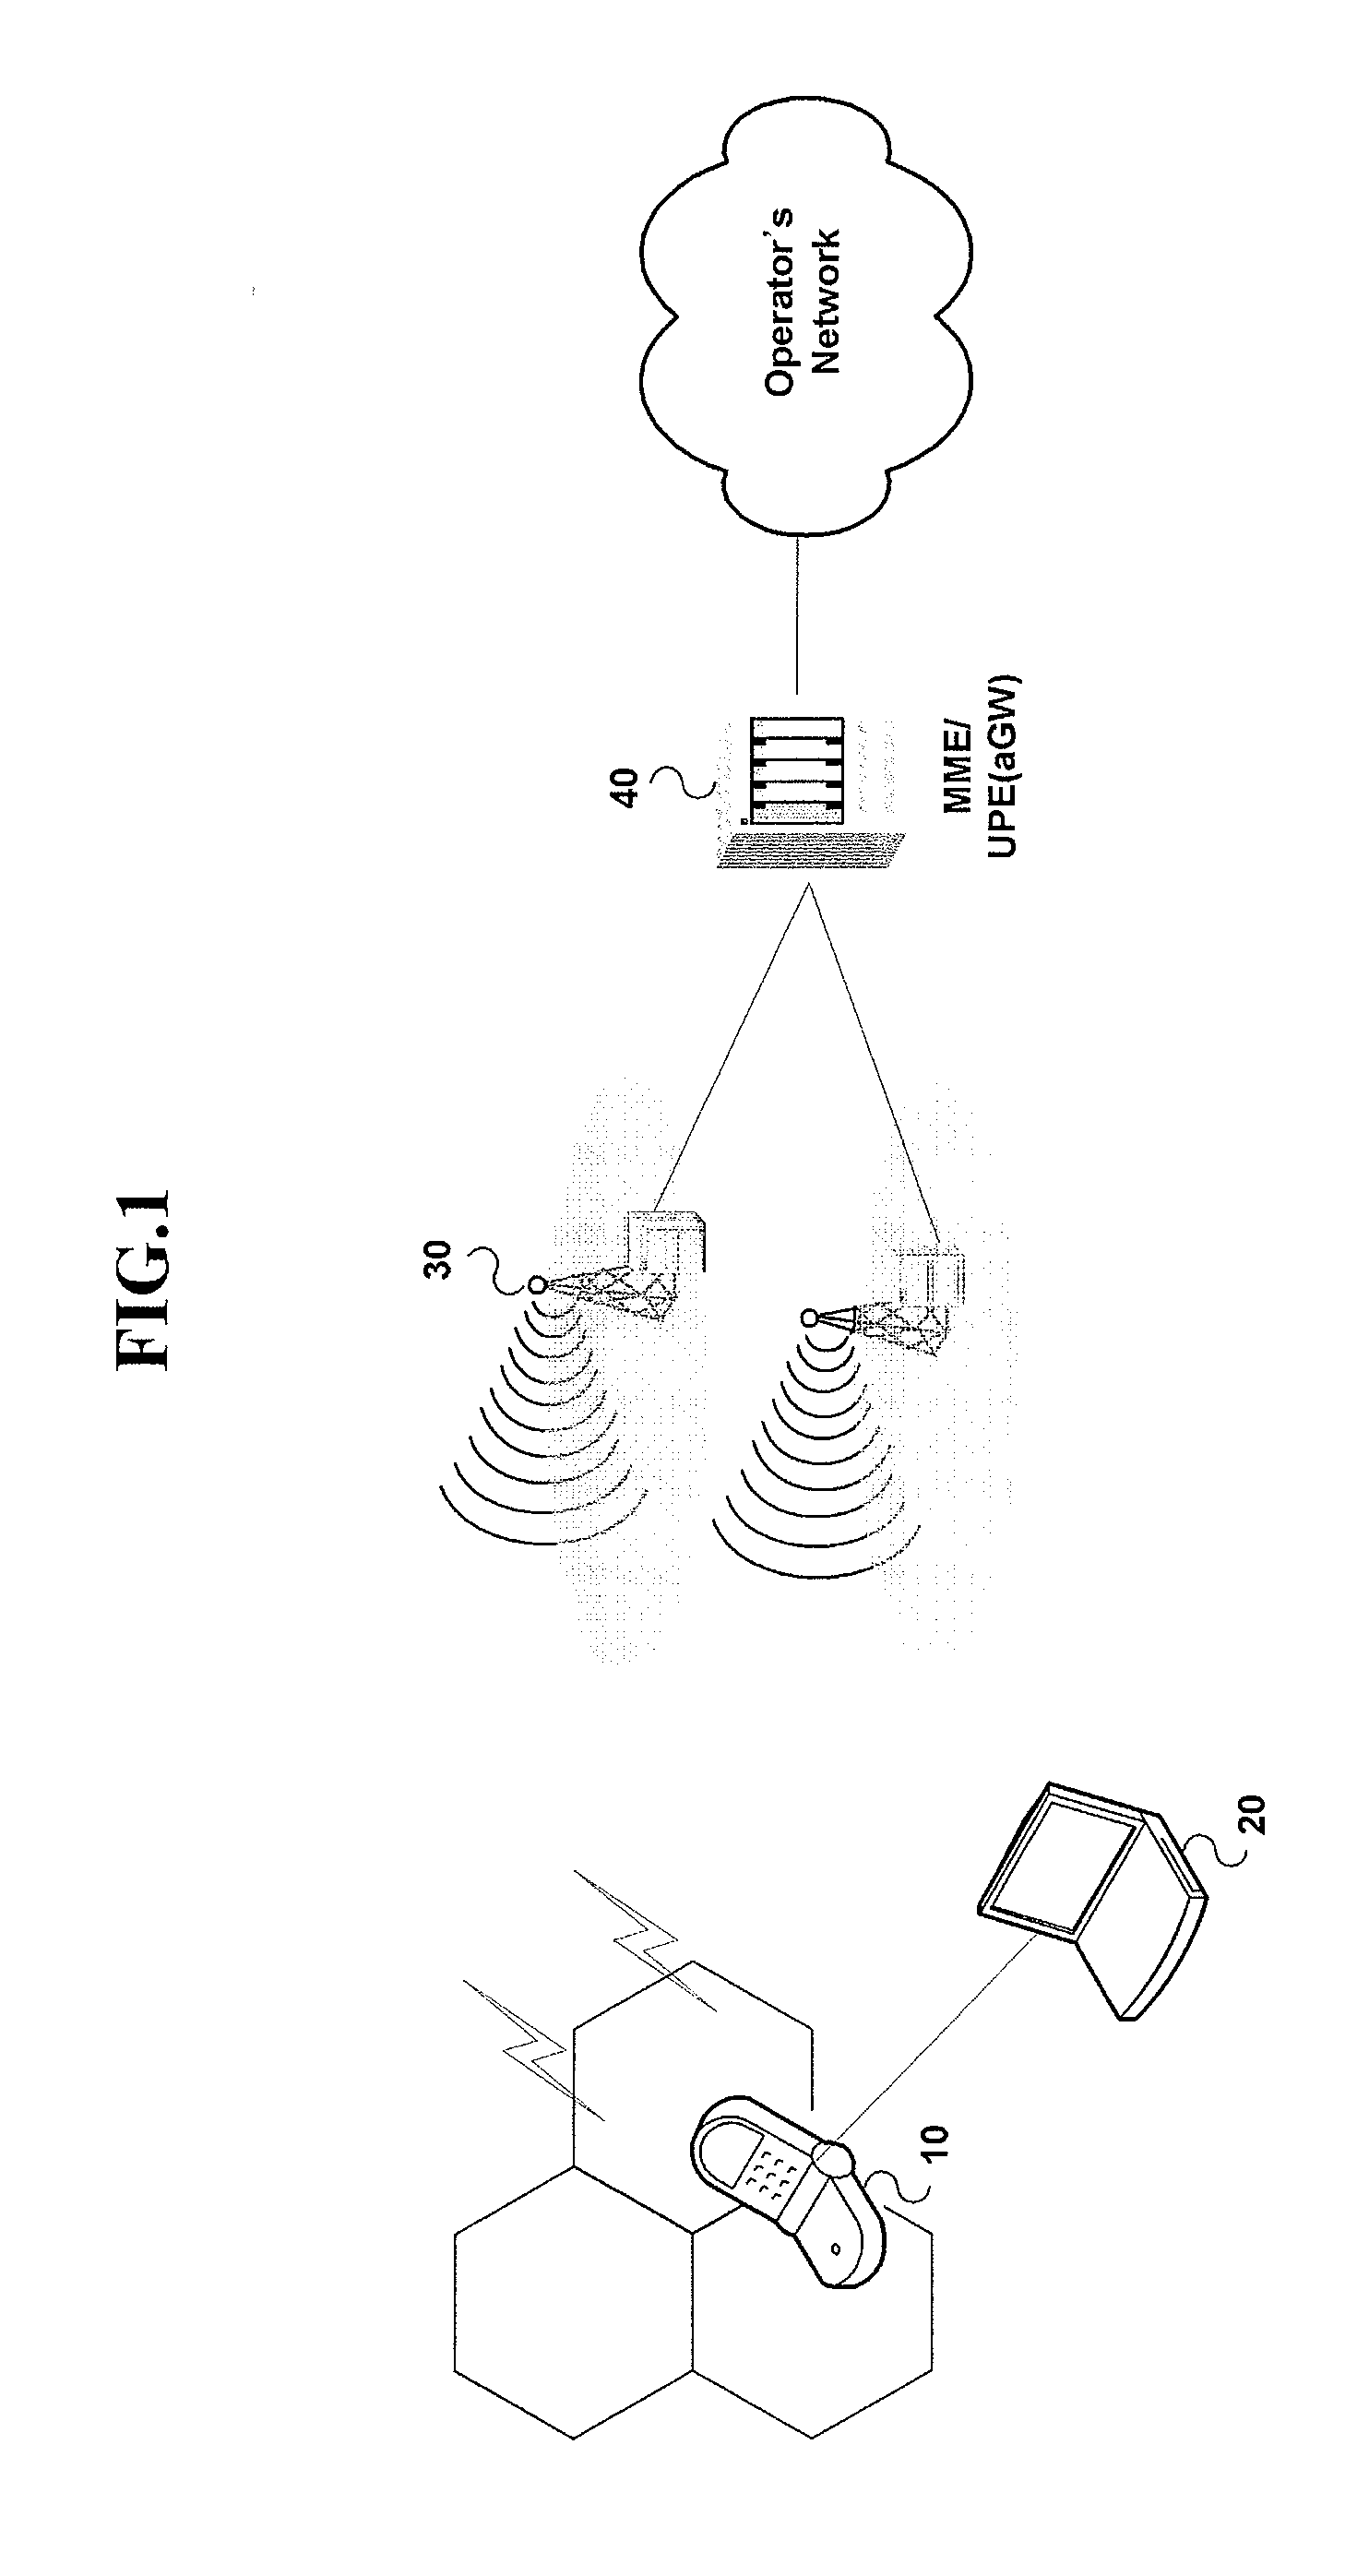 Method of transmitting data in handover between base stations in wireless communication system